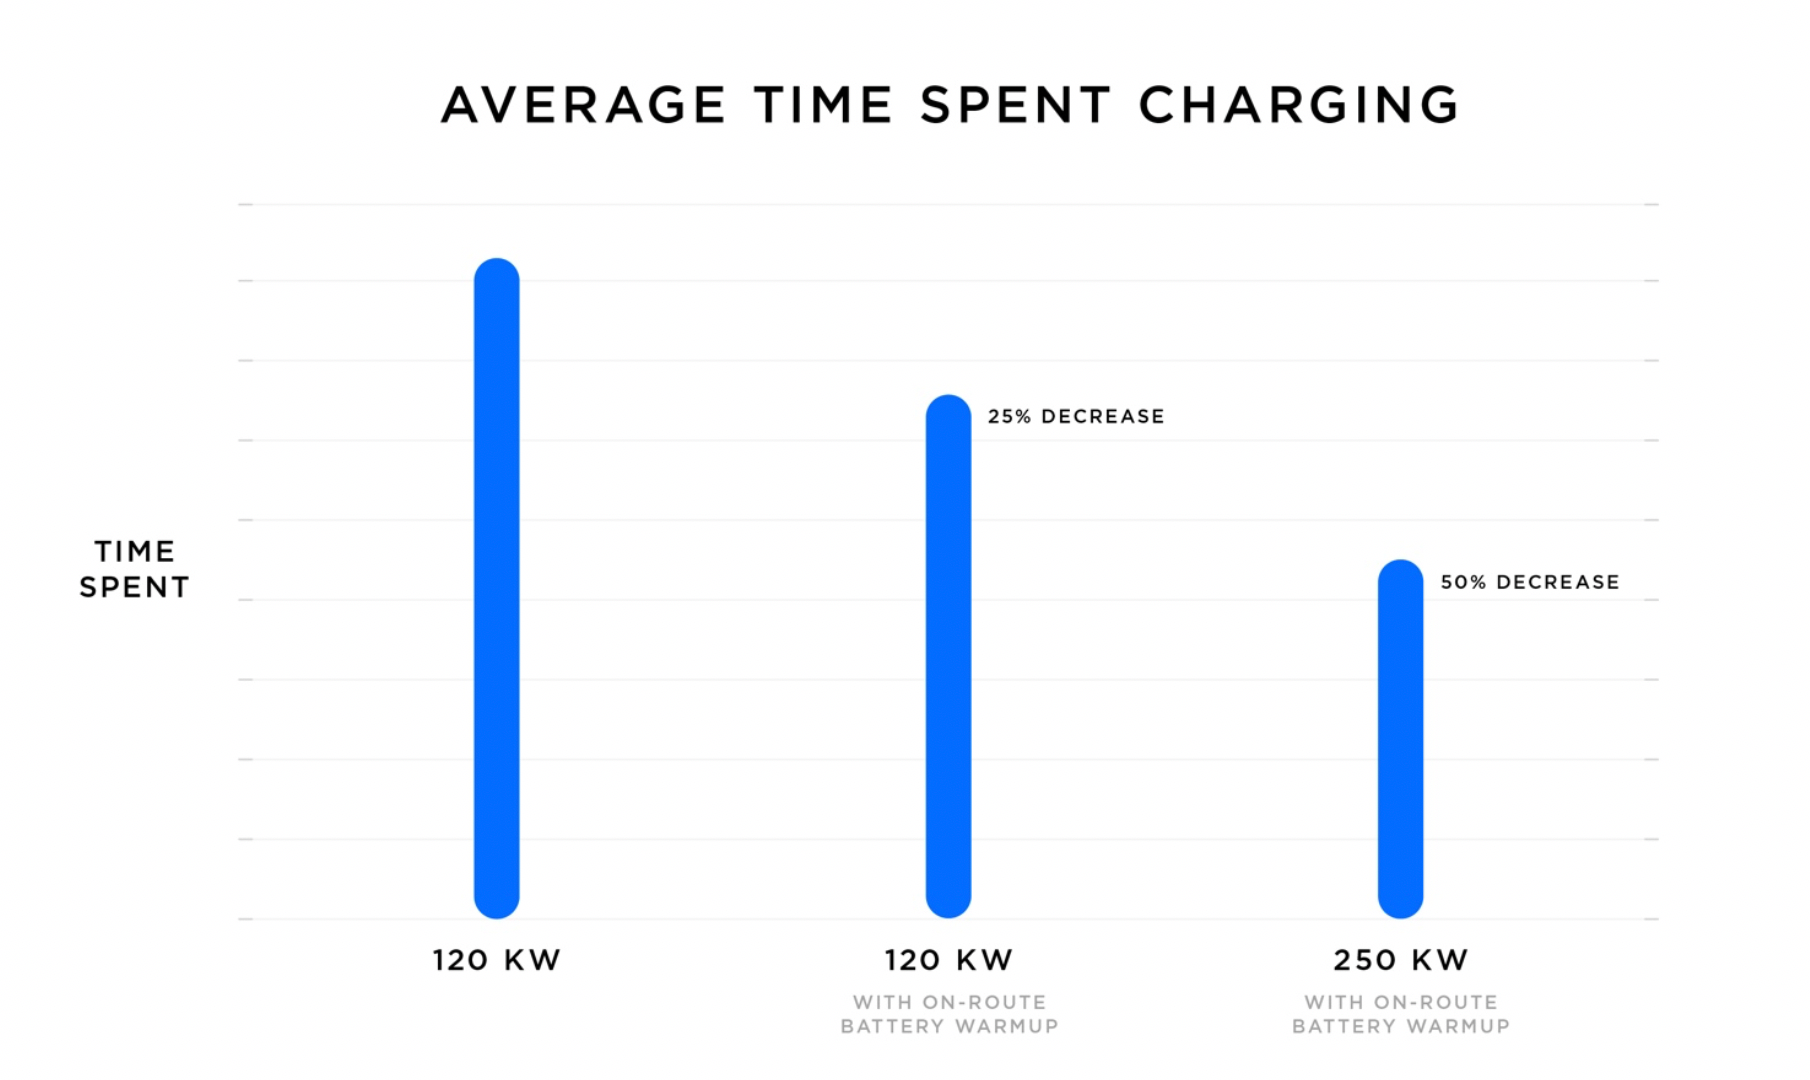 Average time spent charging with on-route warm-up for V2 and V3 Supercharging